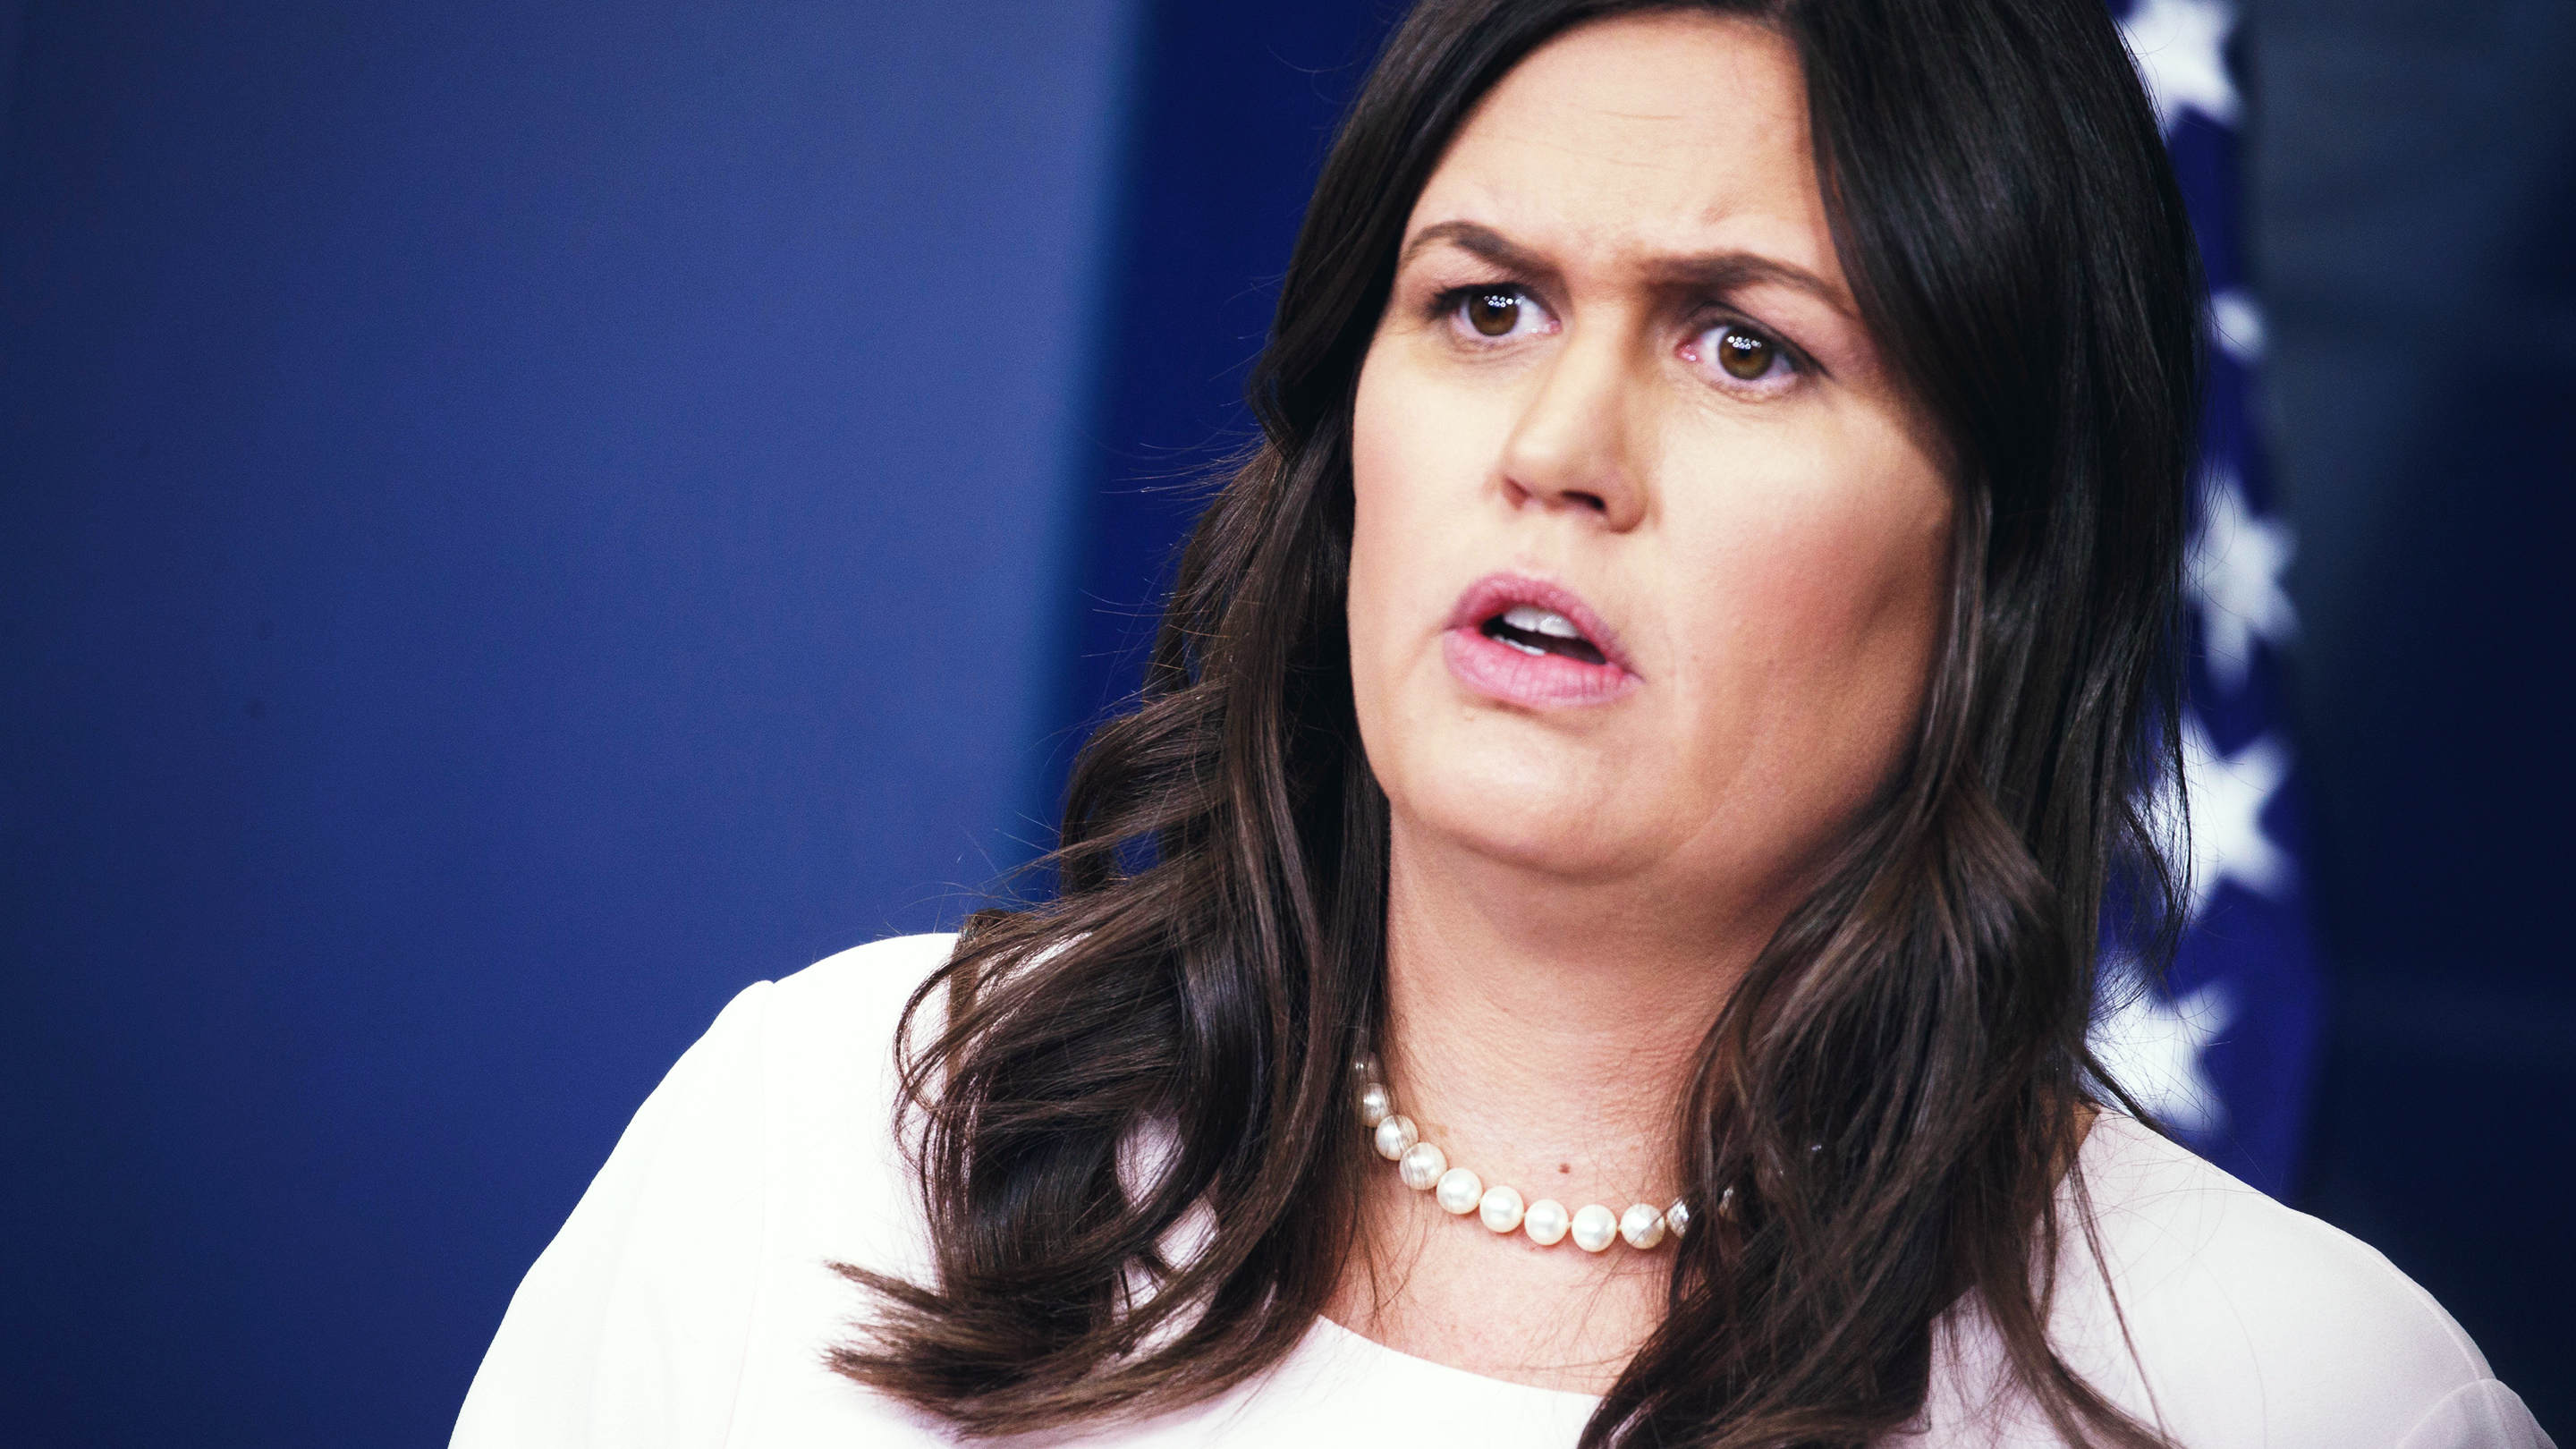 Liberal Civility and the Sarah Huckabee Sanders Red Hen Controversy